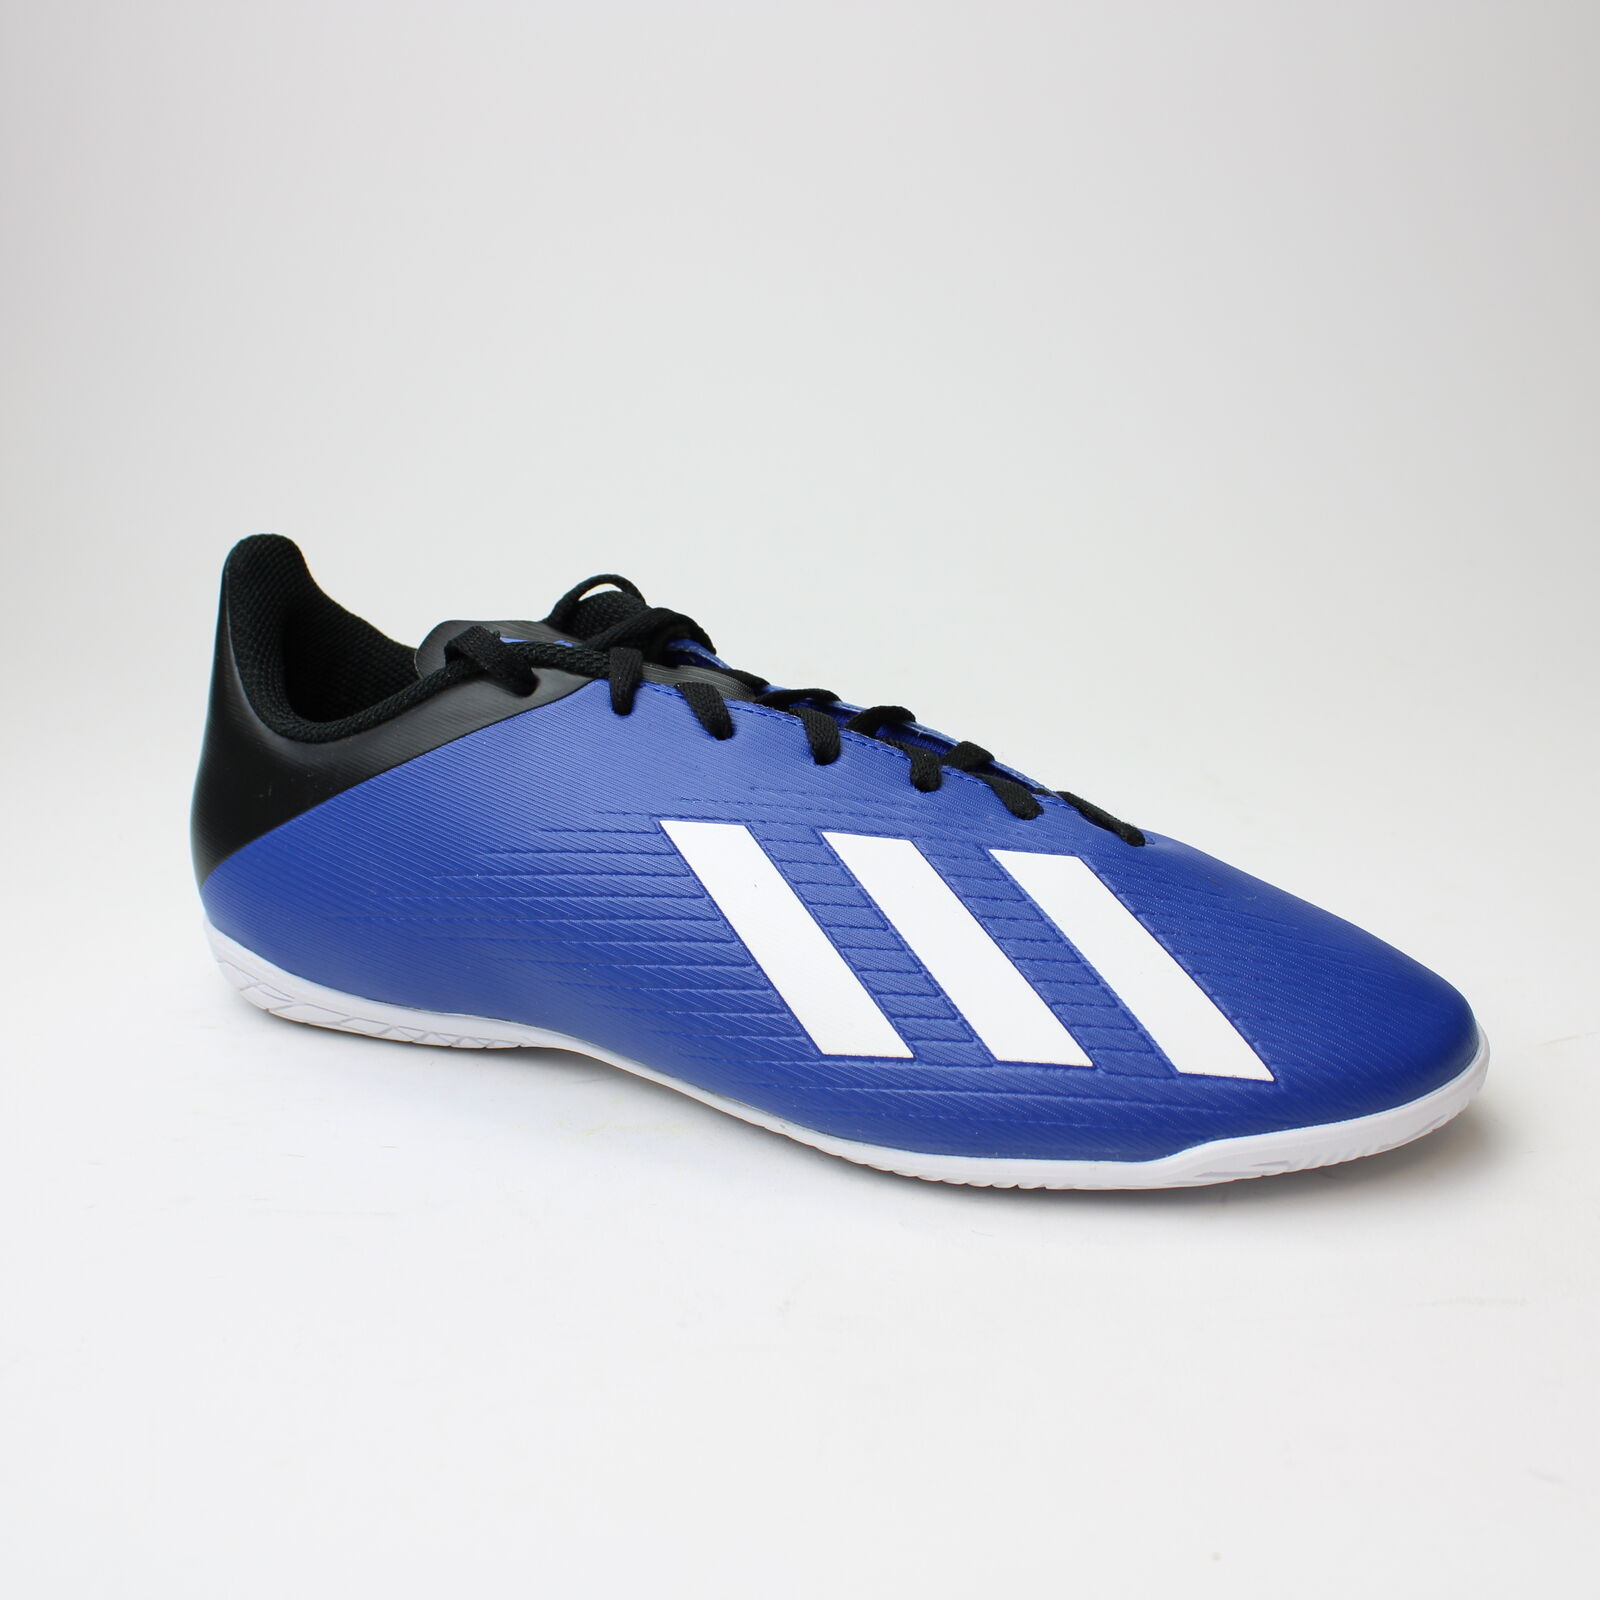 Cava vértice Picasso adidas X 19.4 Indoor Soccer Mens Size Athletic Shoes EF1619 – ASA College:  Florida